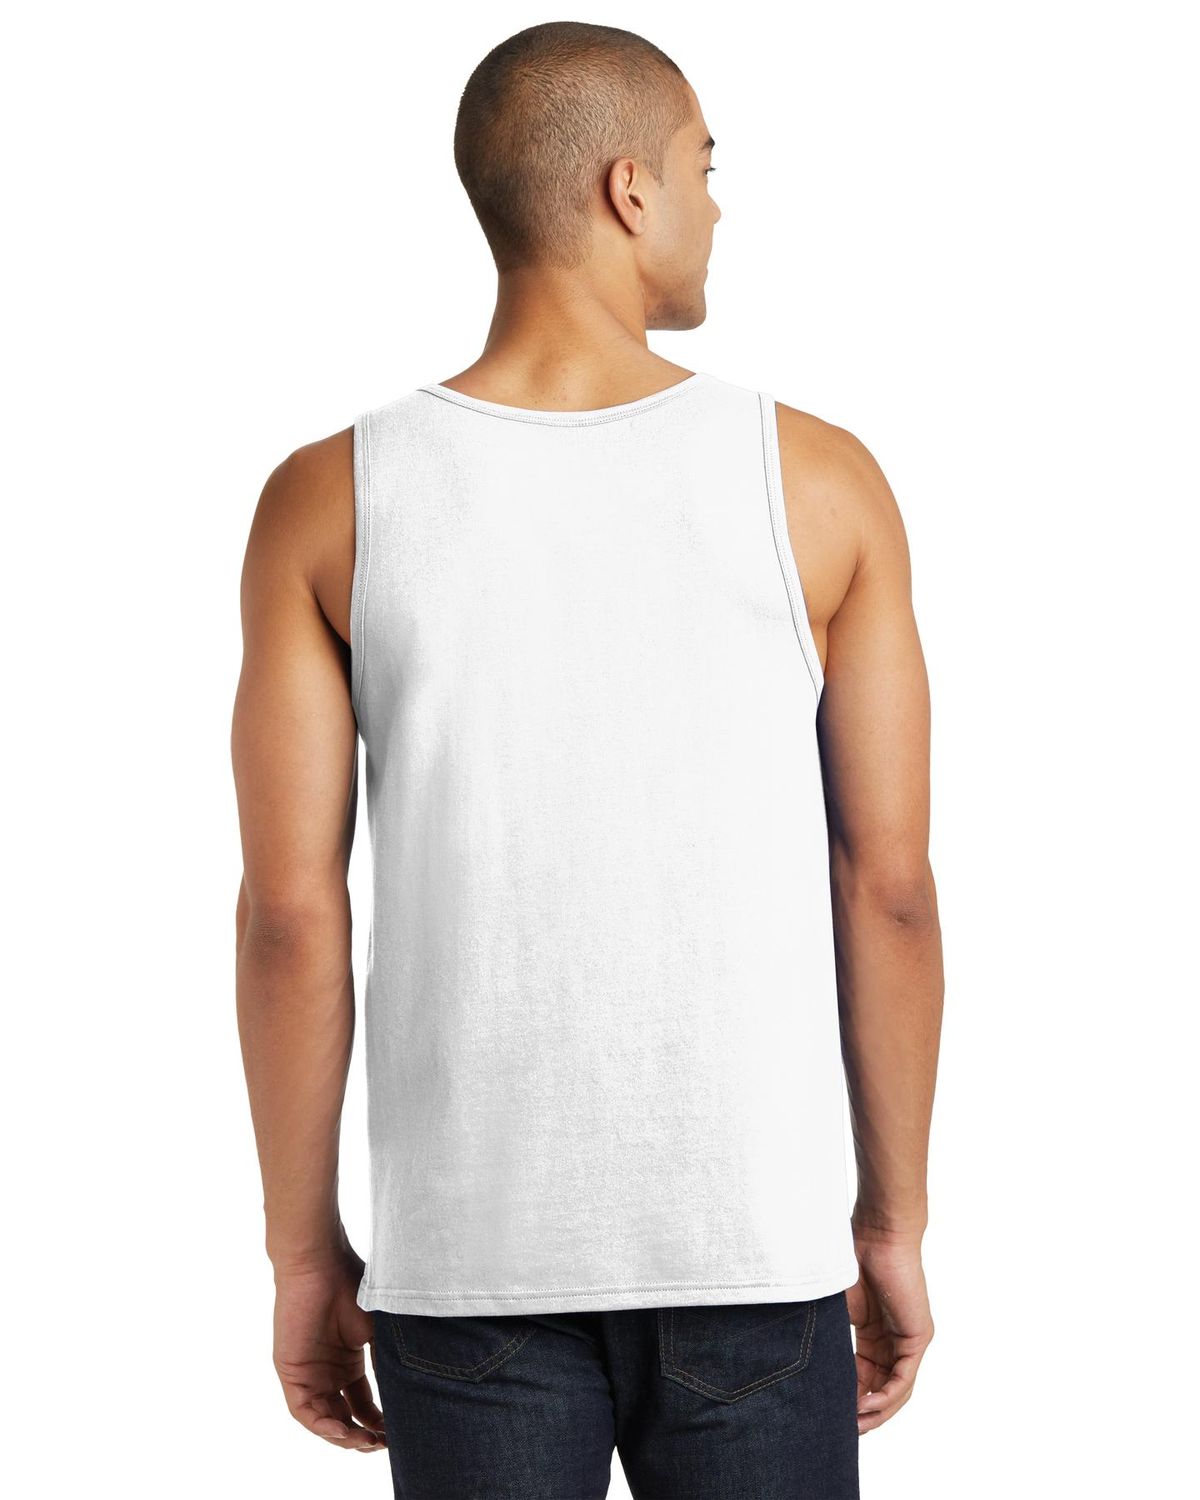 'District DT5300 Young Mens The Concert Tank'